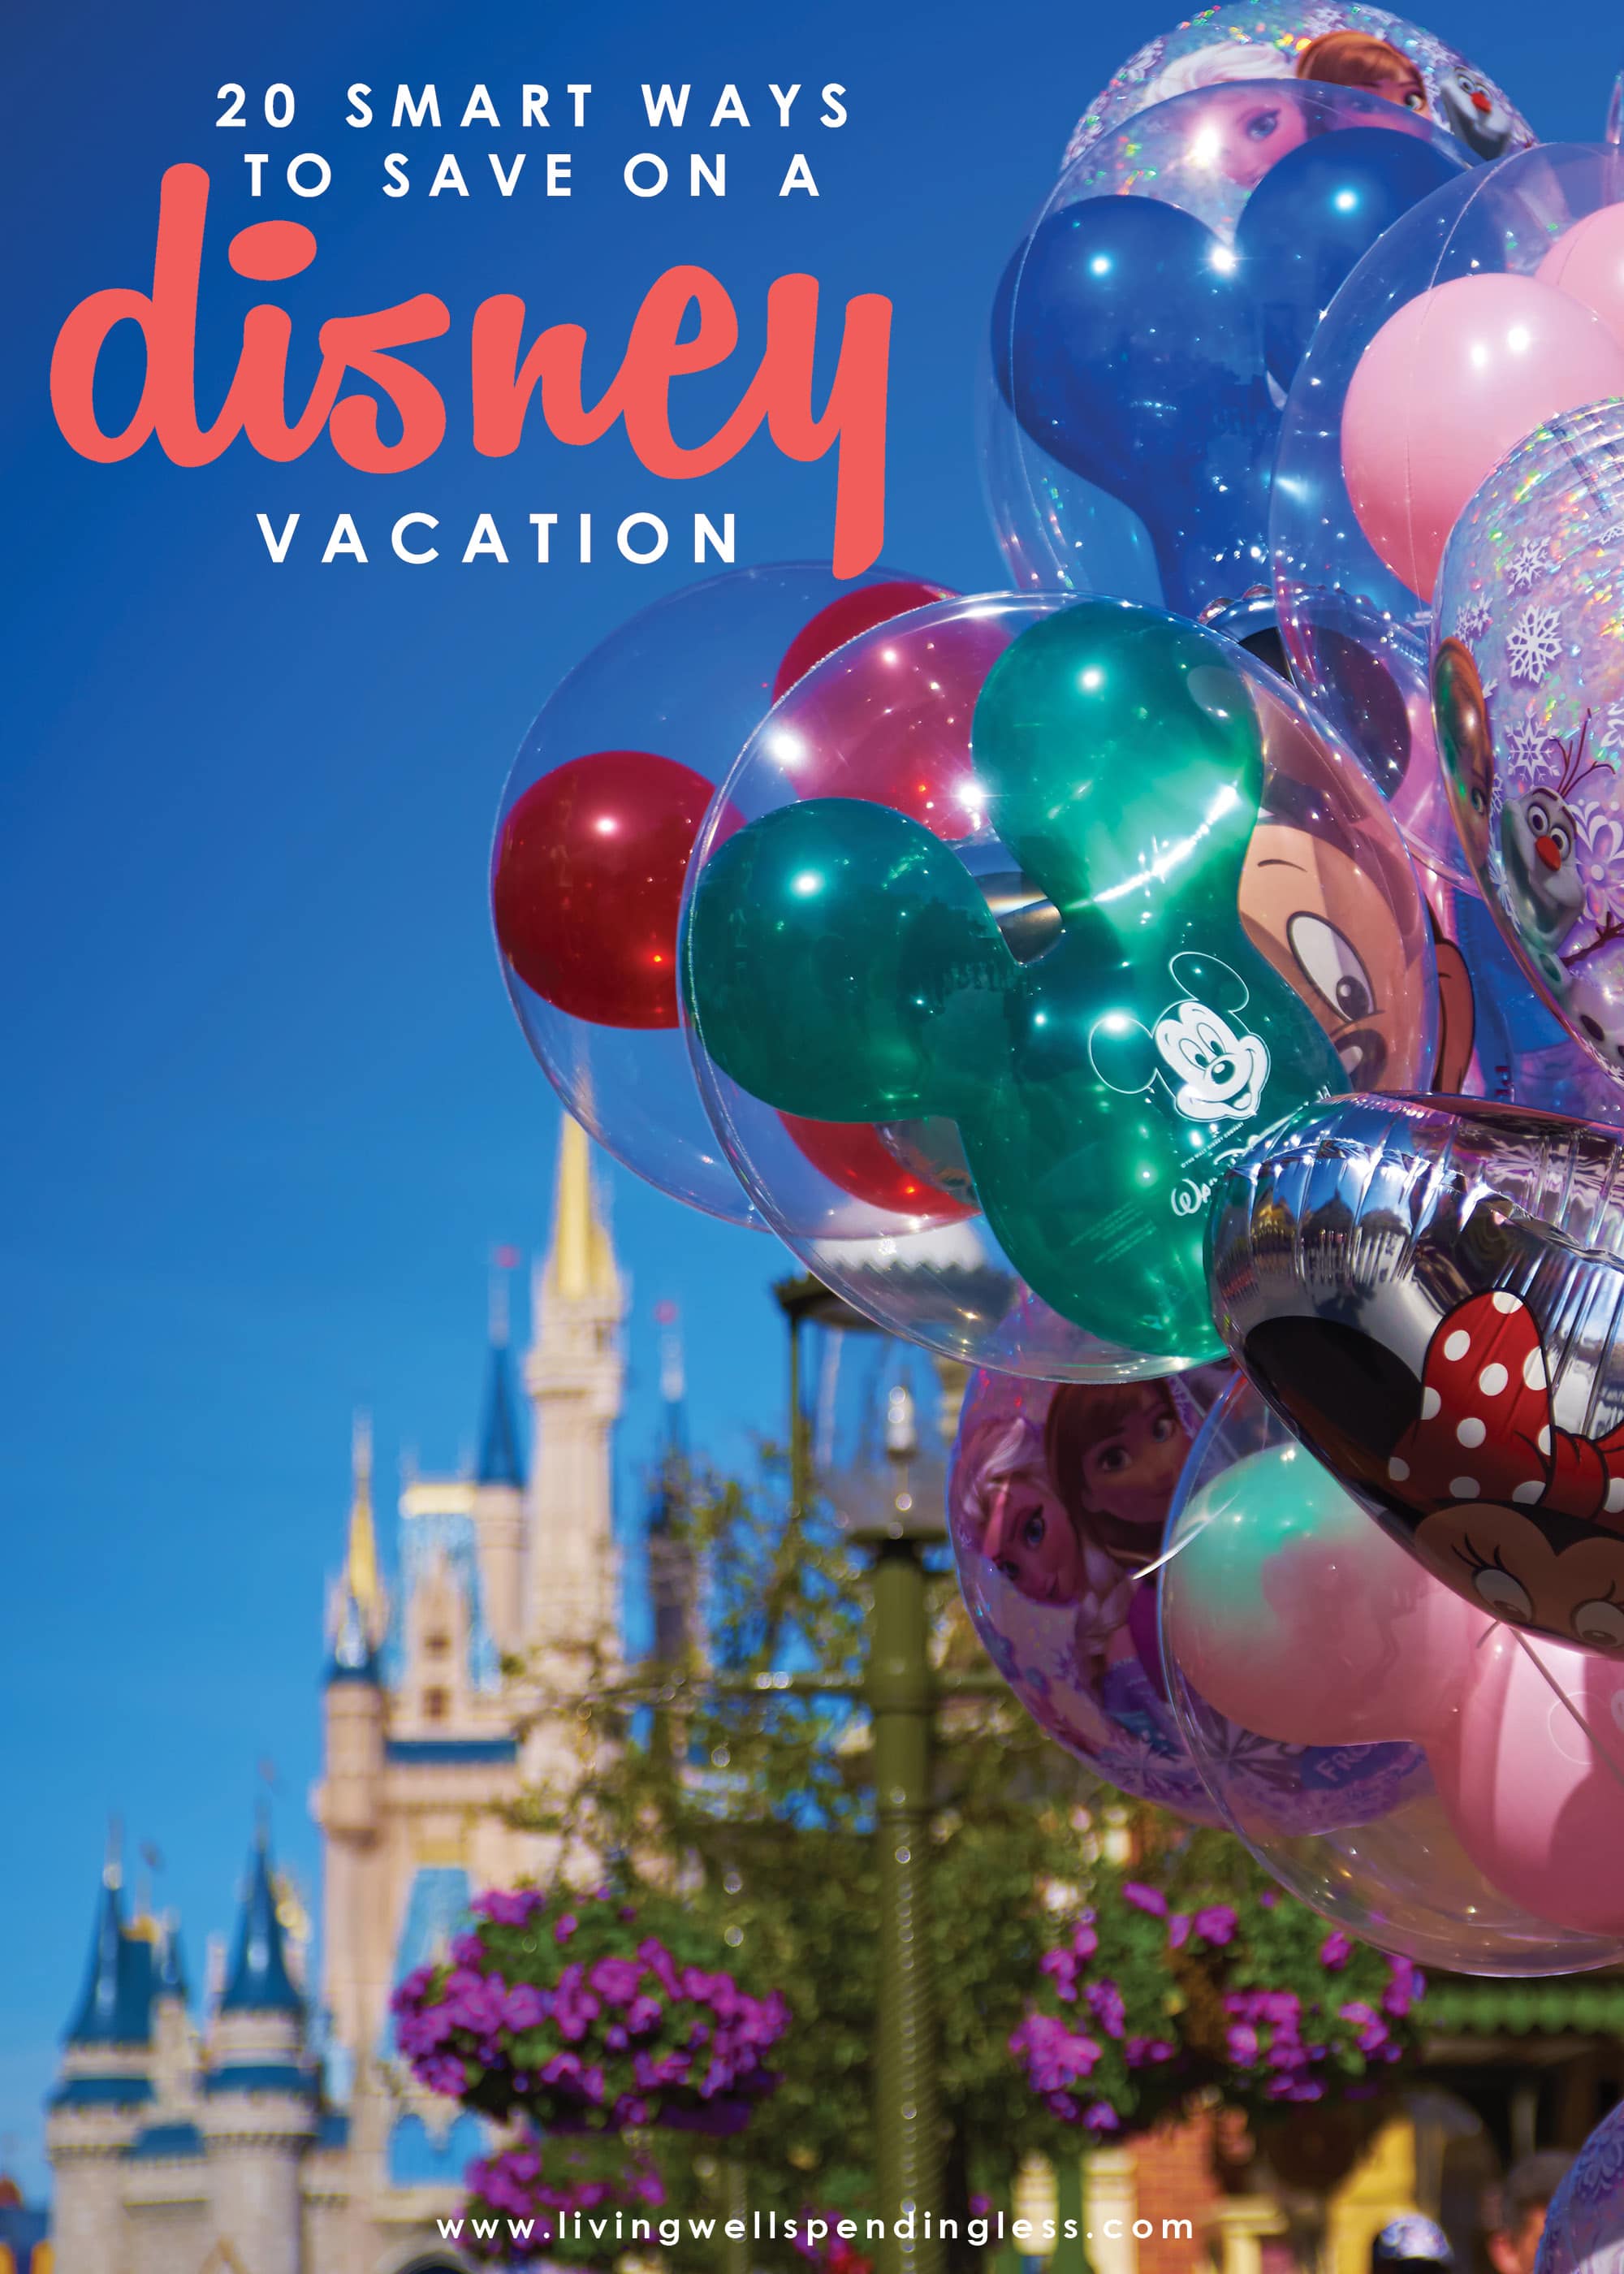 20 Smart Ways to Save on a Disney Vacation  Save at Disney